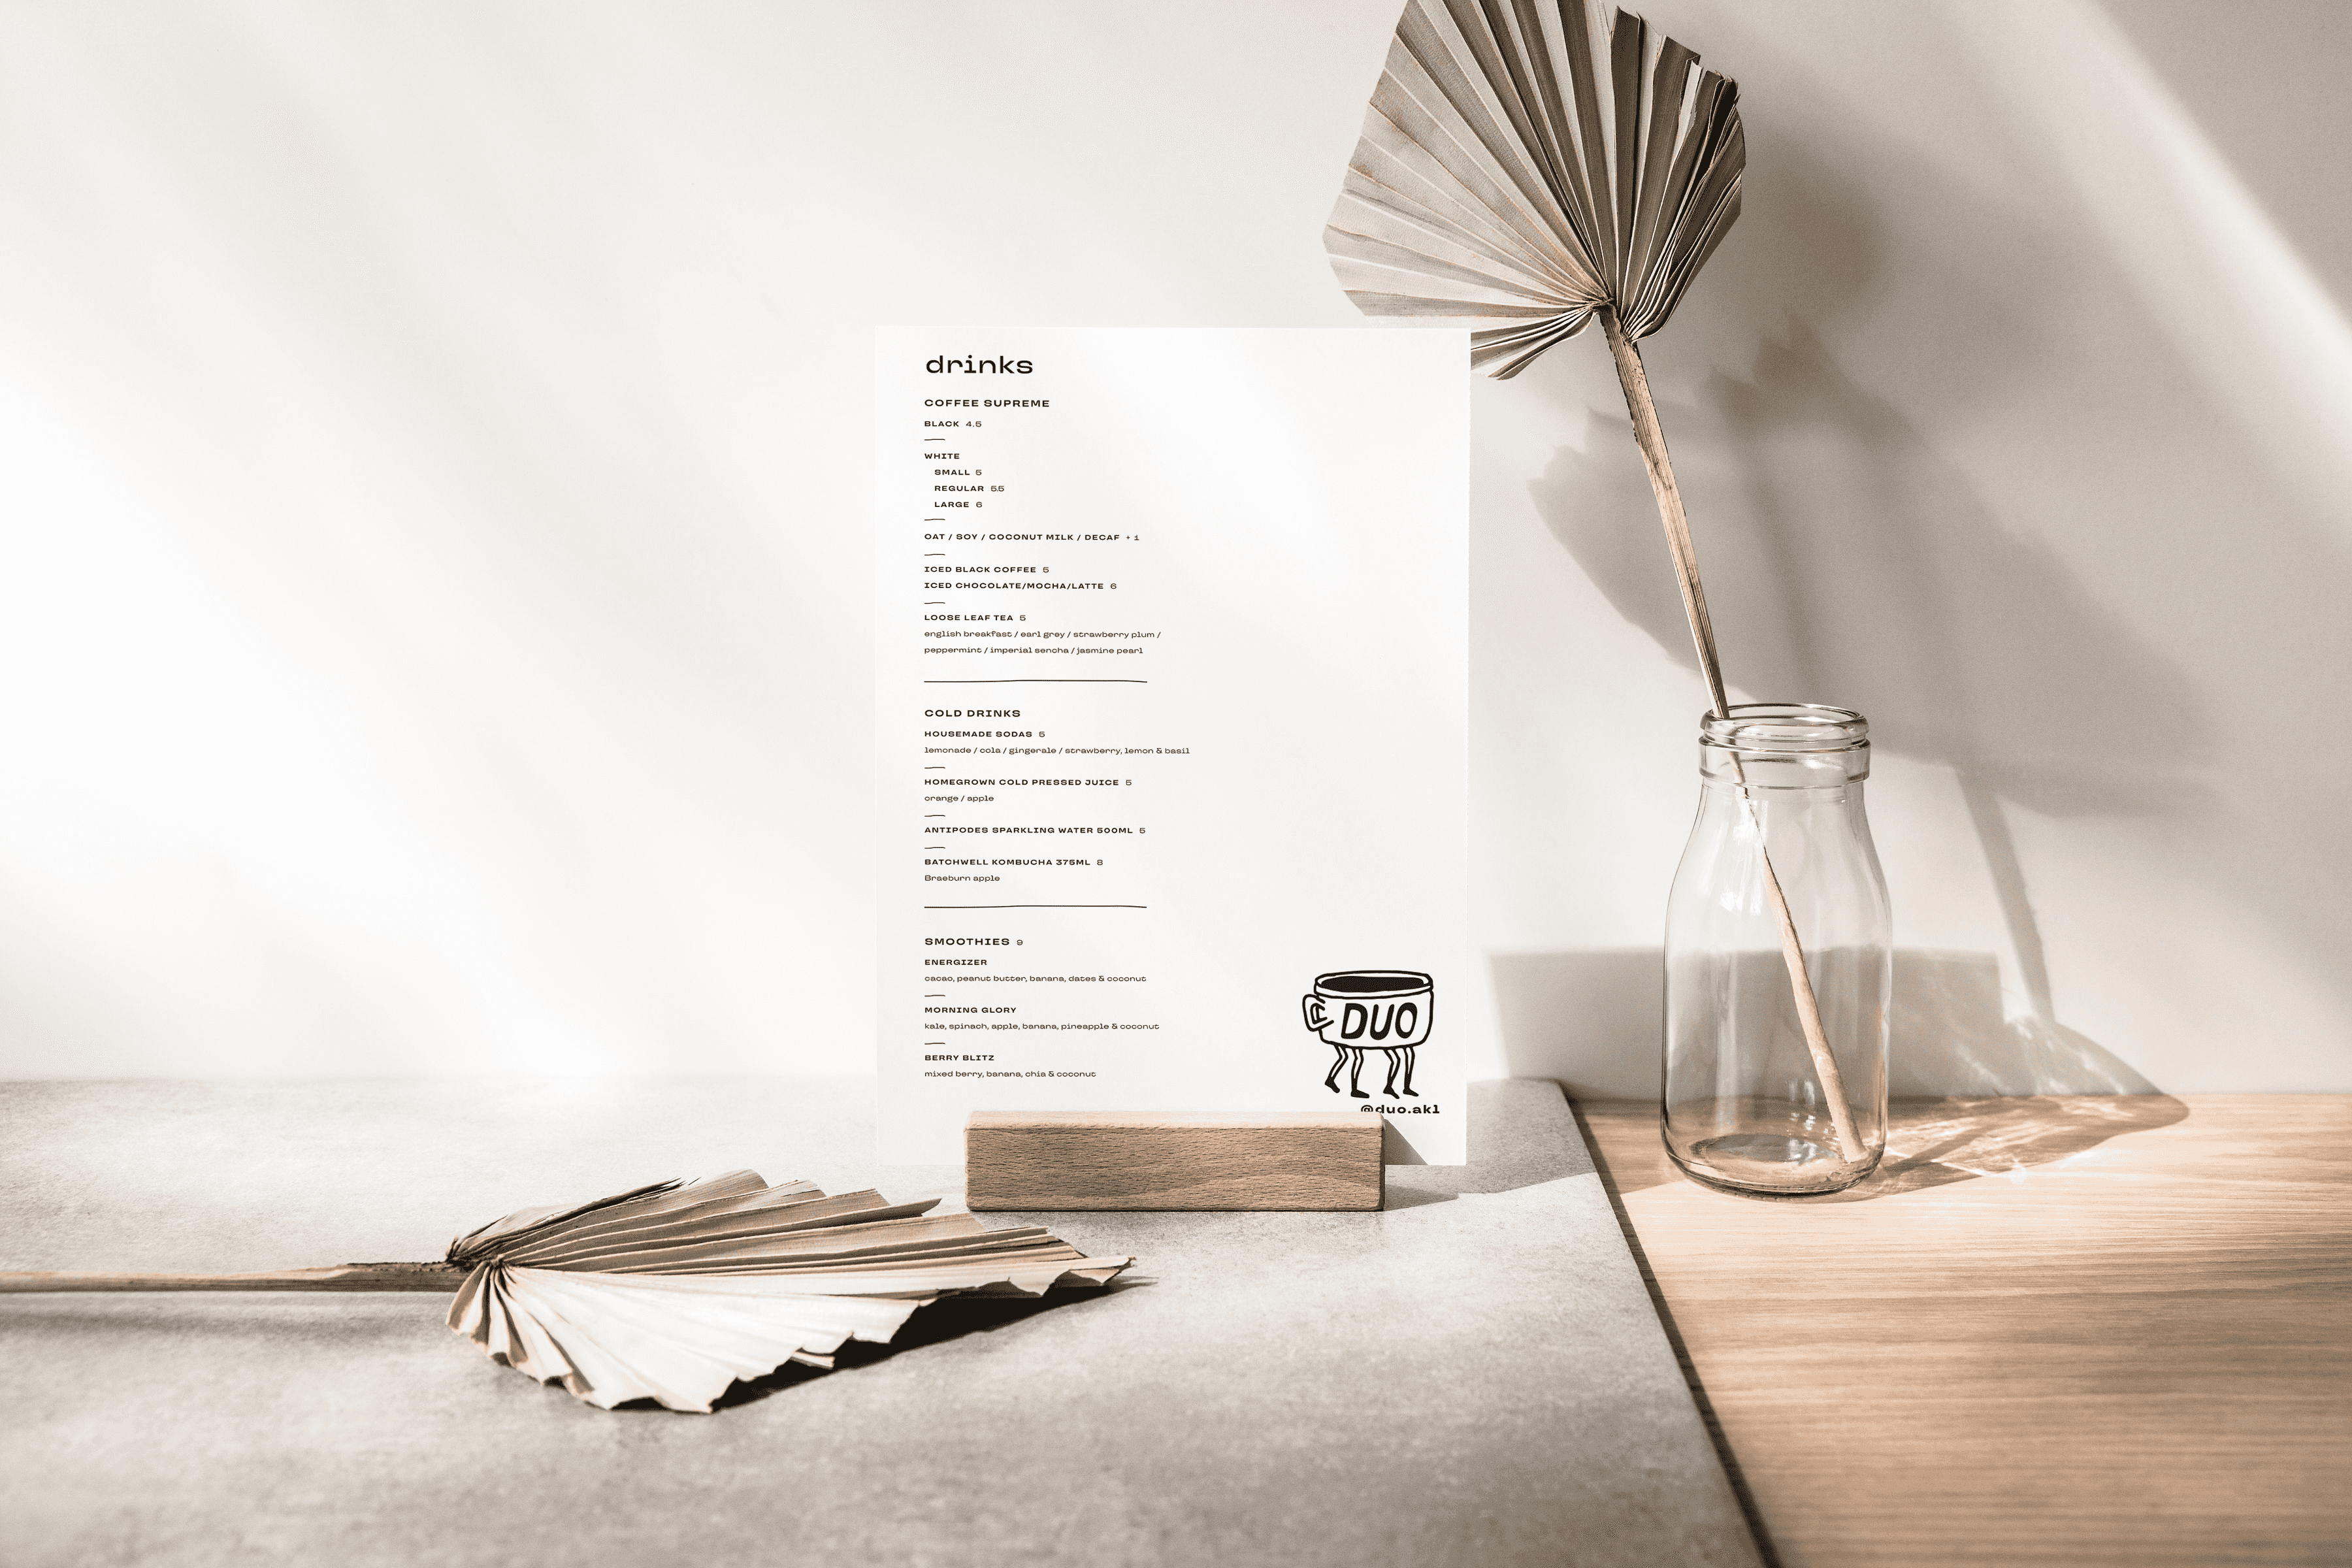 Duo menu display with dried palm leaves and sunlight